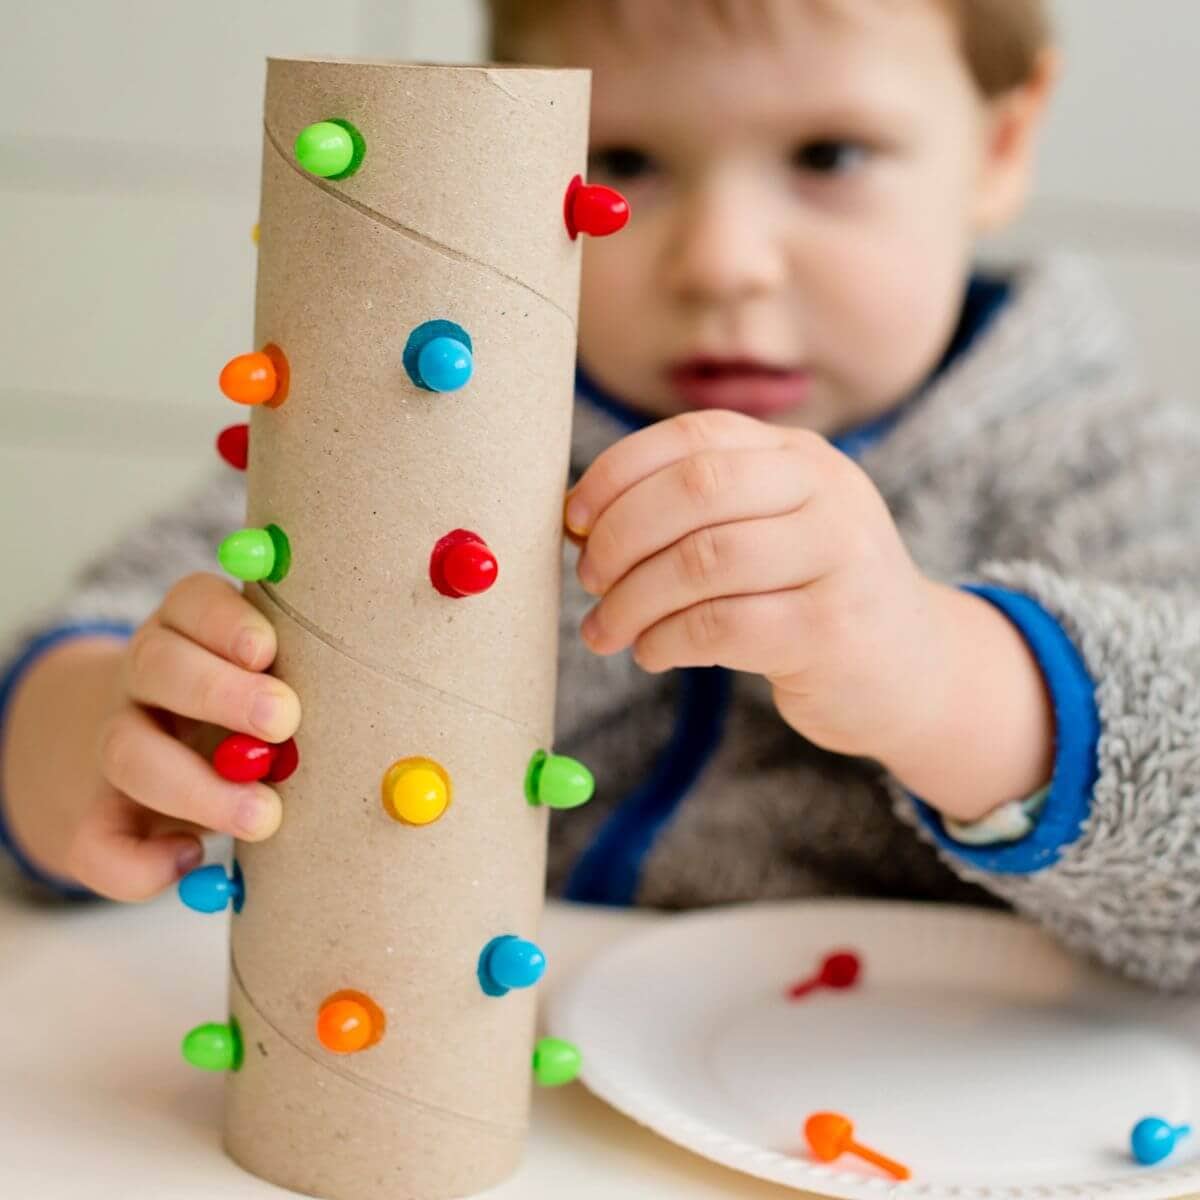 Close up shot on a little boy playing with a paper towel roll that has little holes cut it in, with different colored dots sticking out of each hole.